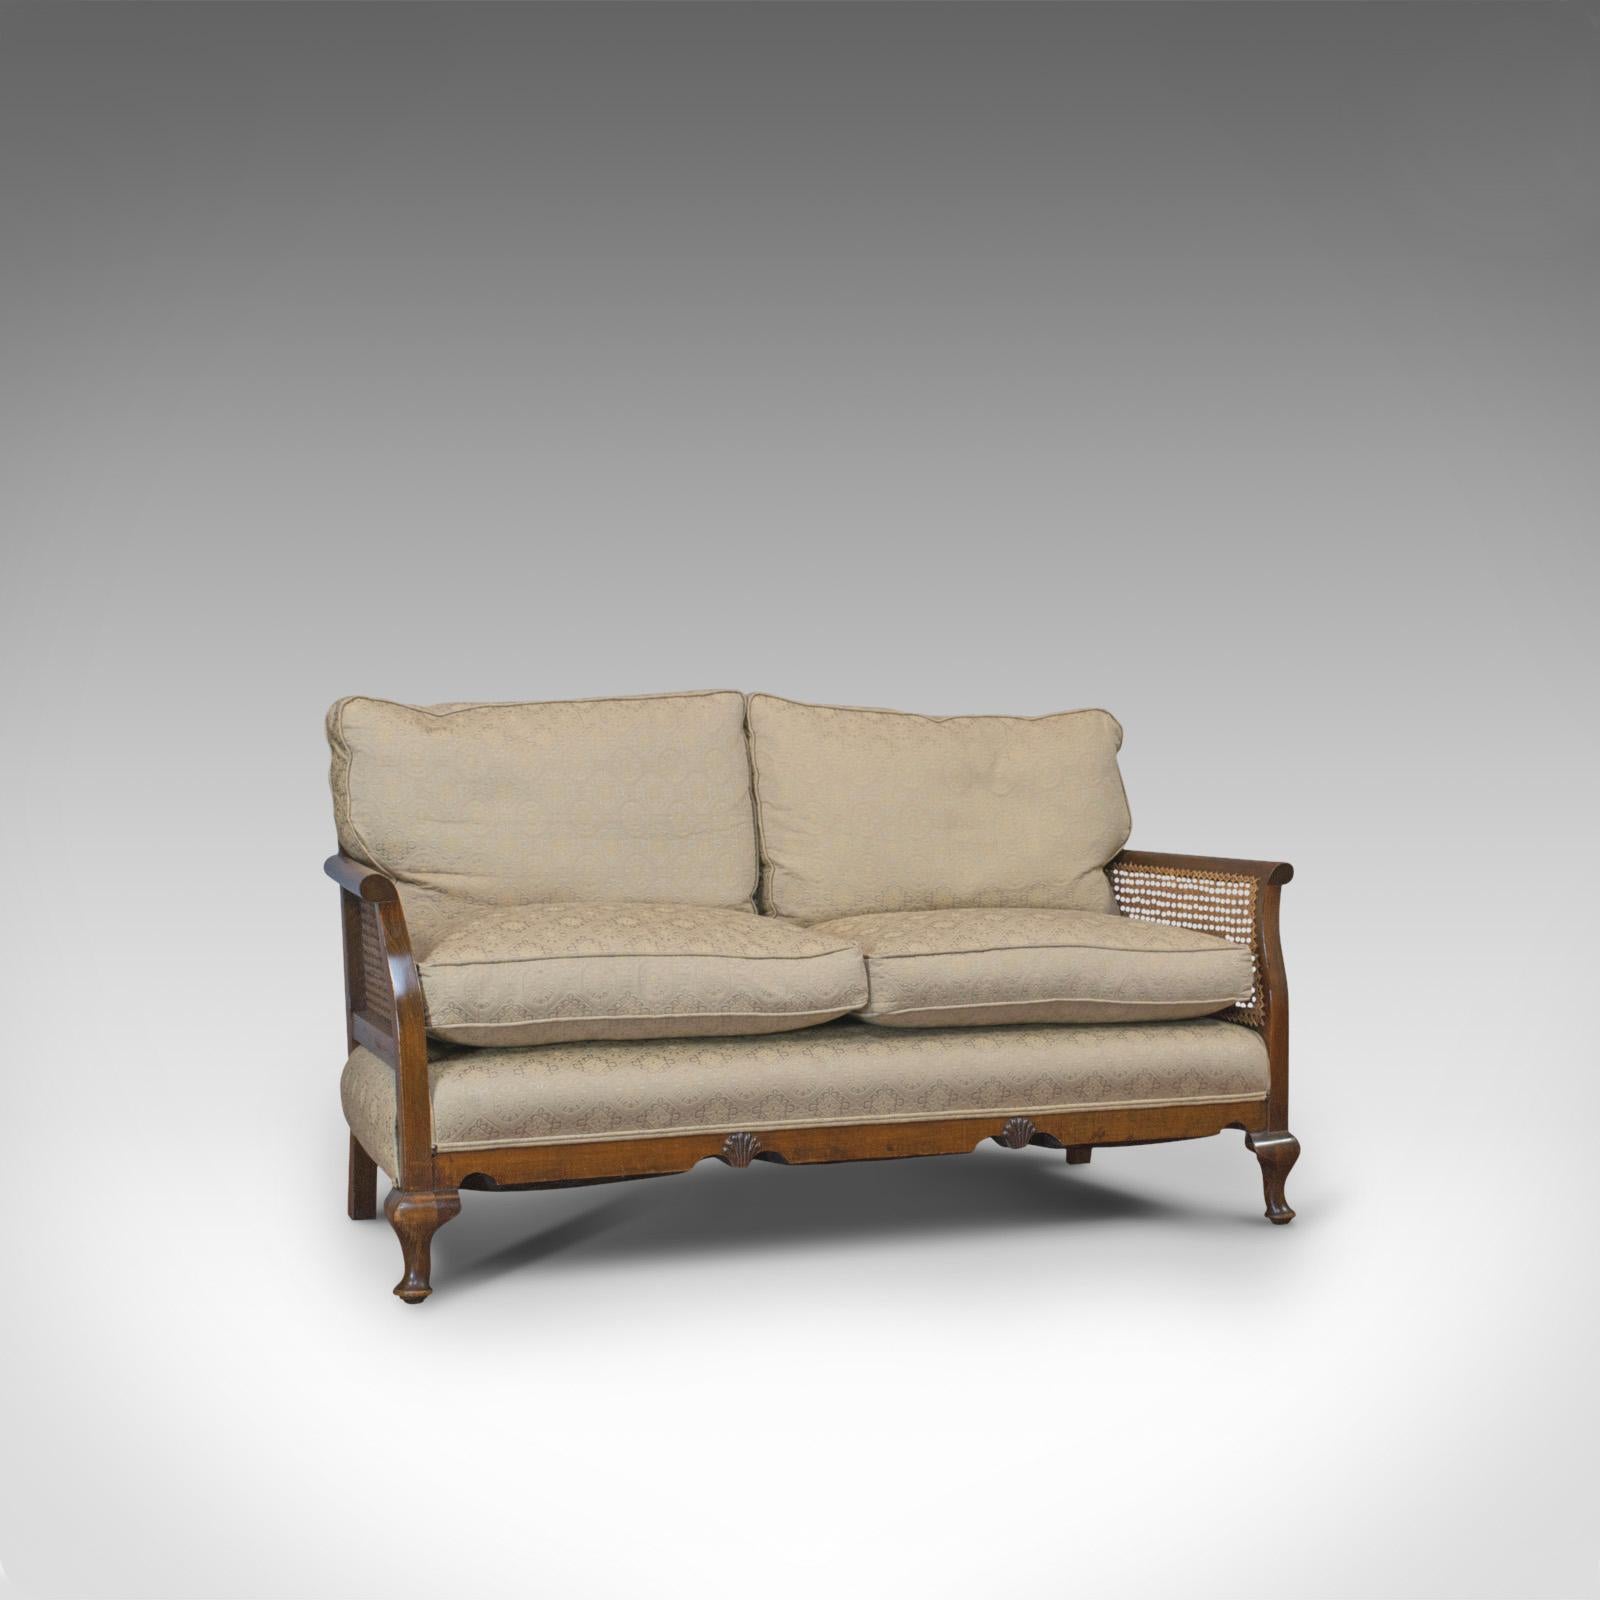 This is an antique bergere suite. An English, beech and cane chair and sofa set, dating to the Edwardian period, circa 1910.

An elegant suite of fine form and upholstery
The whole displays a desirable aged patina
Generous beech frame with fine